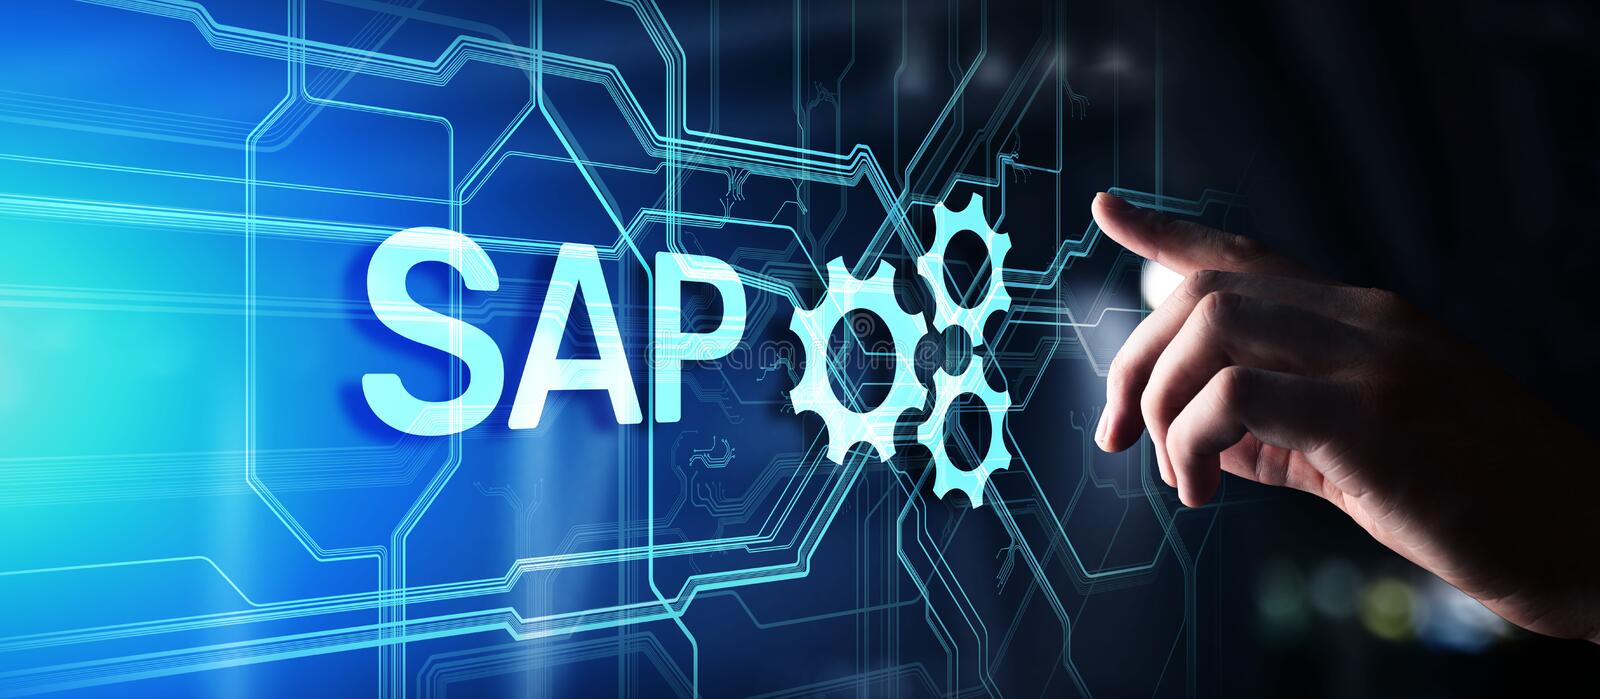 SAP-integrated business planning Malaysia